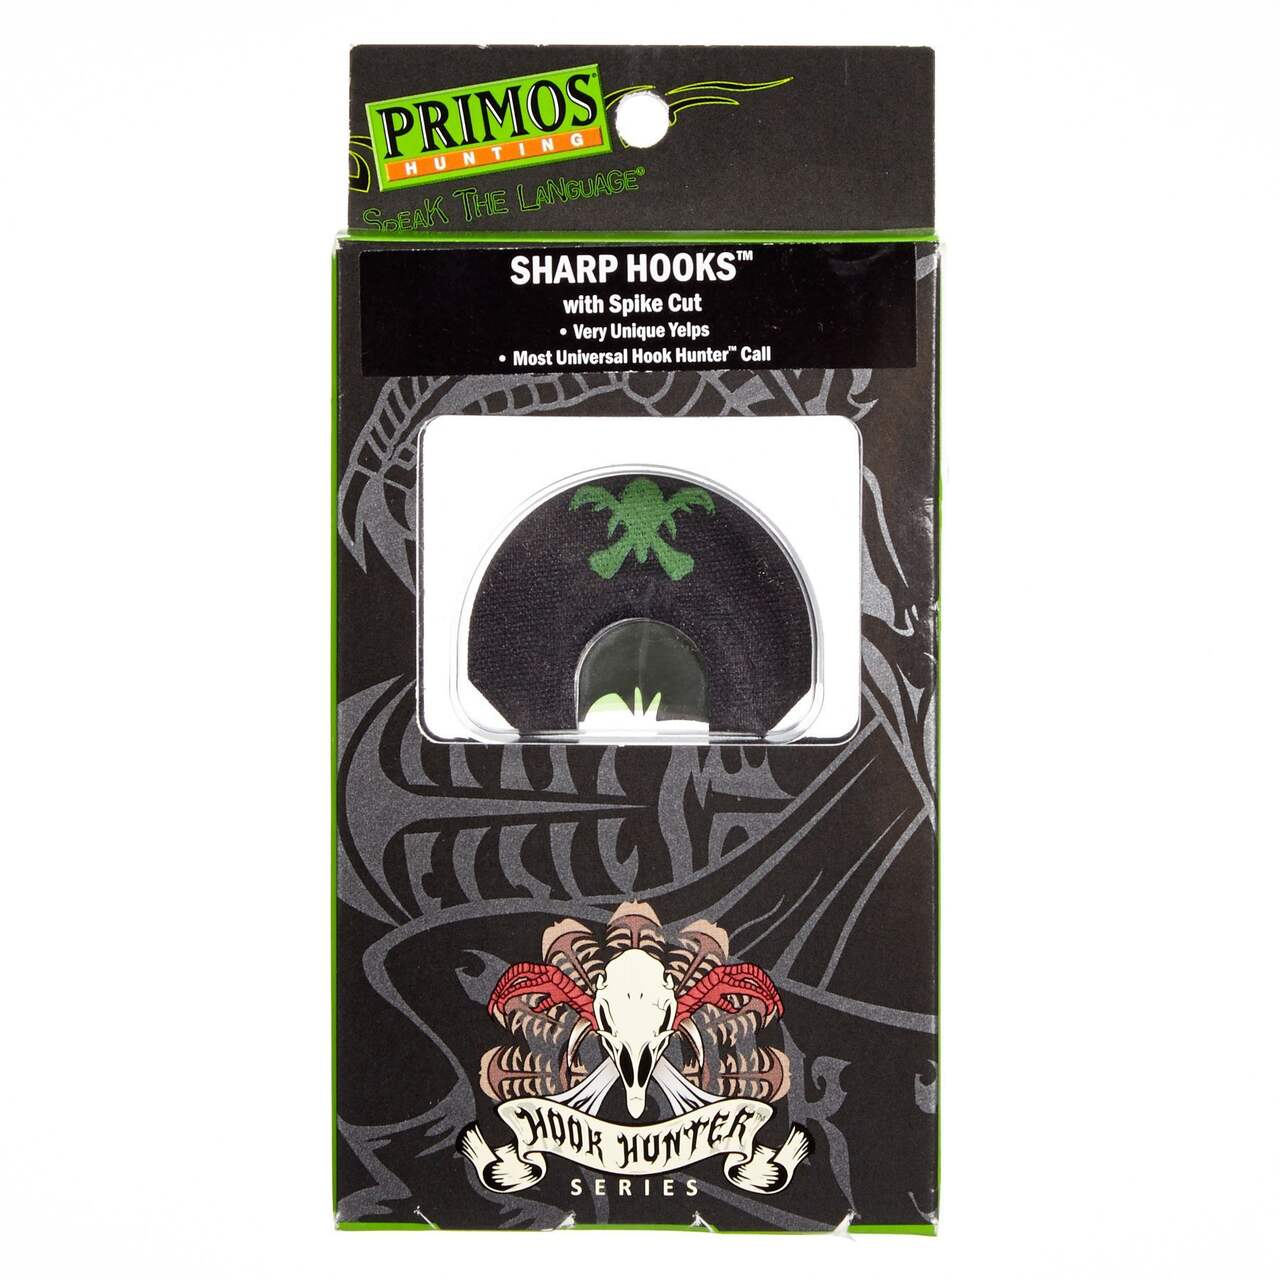 https://media-www.canadiantire.ca/product/playing/hunting/hunting-accessories/1751625/hook-hunter-long-hooks-mouth-call-f7cc32d9-6ffc-43fe-83a8-05ecfb04322a-jpgrendition.jpg?imdensity=1&imwidth=640&impolicy=mZoom